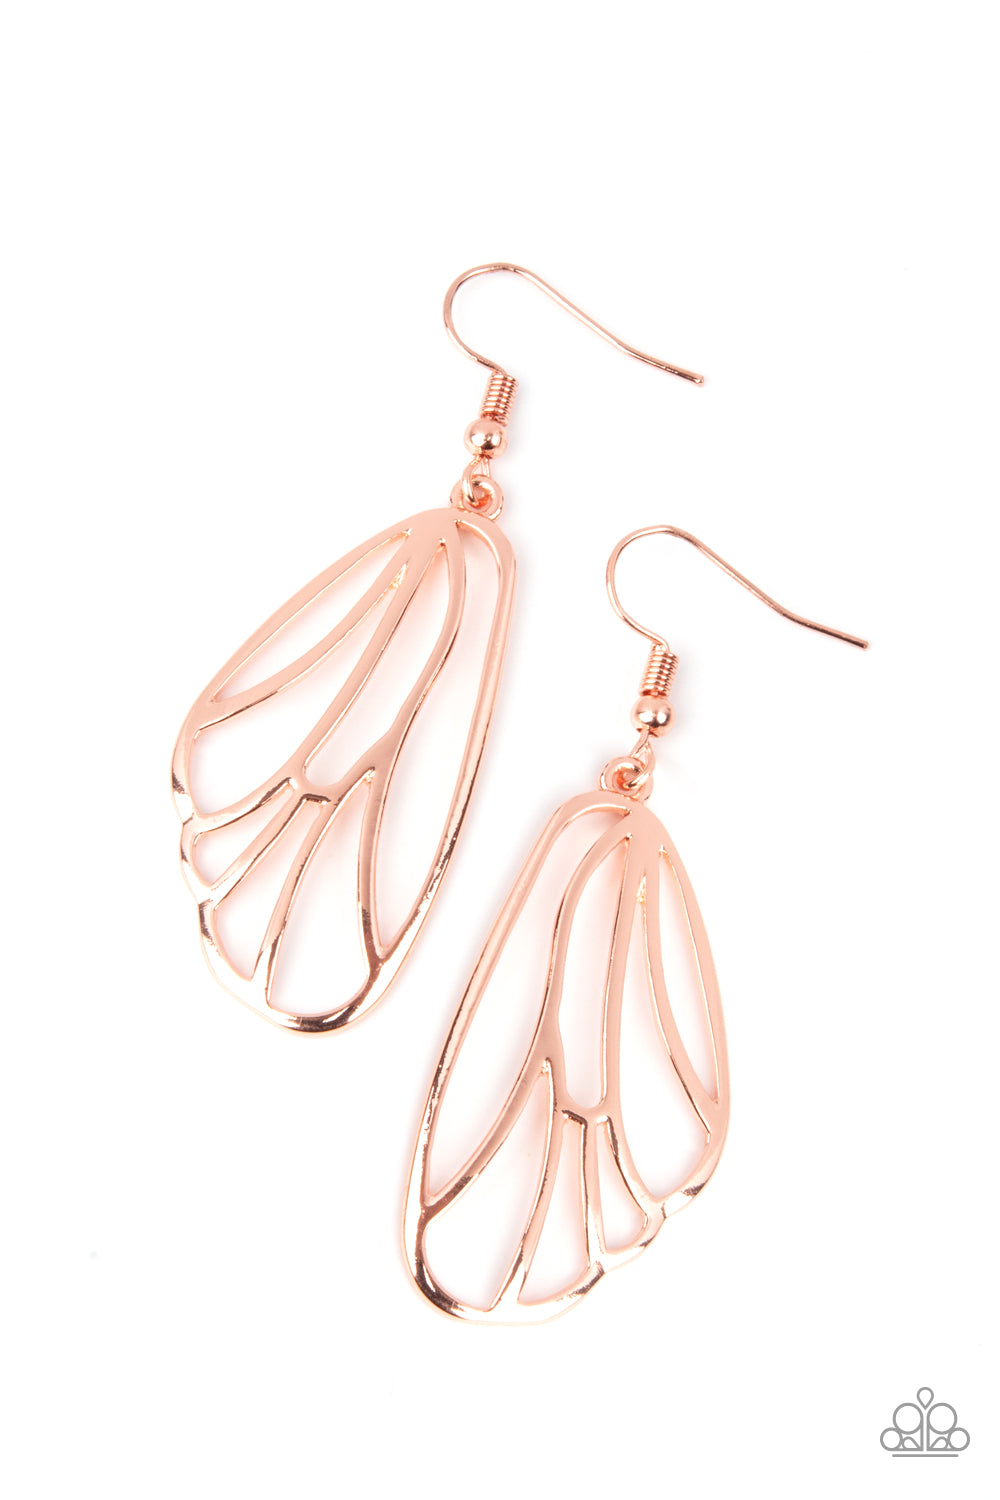 Turn Into A Butterfly - Copper Earring - Princess Glam Shop